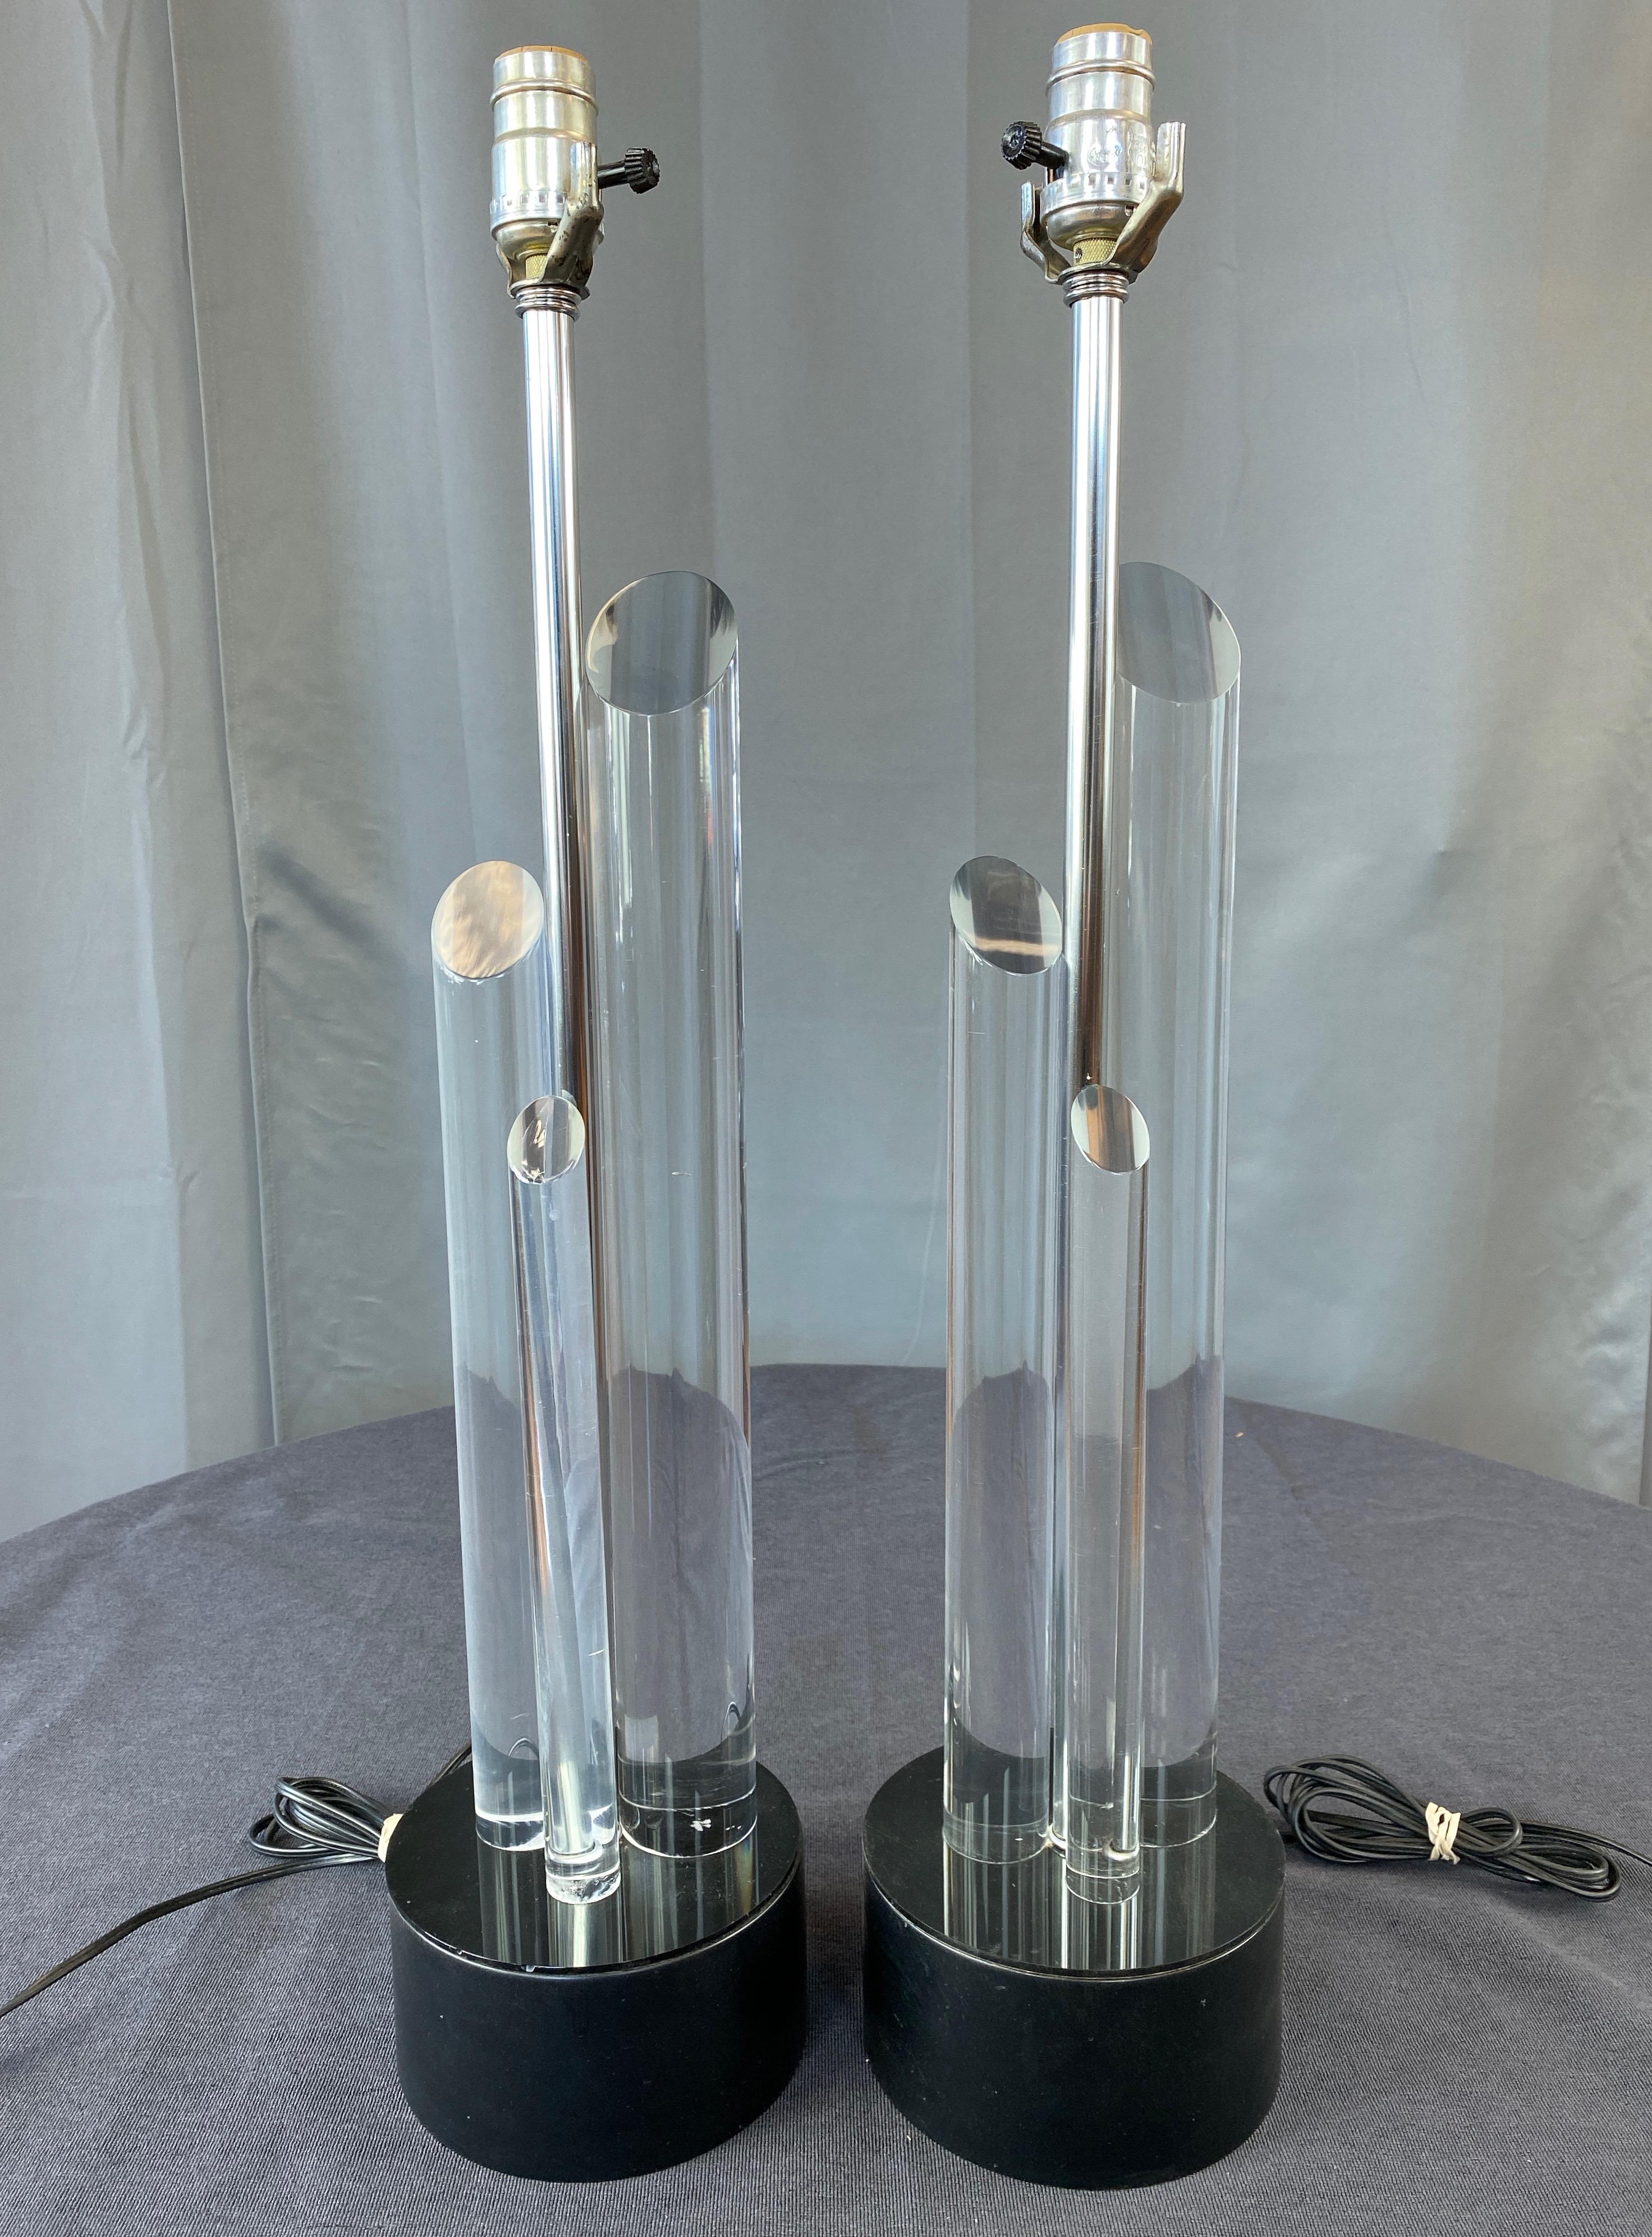 A pair of chic 1960s lucite table lamps on black metal bases done in the manner of Charles Hollis Jones.

Sculptural trio of lucite rods of graduated height and diameter on acrylic-capped matte black enameled cast aluminum base. Polished nickel stem